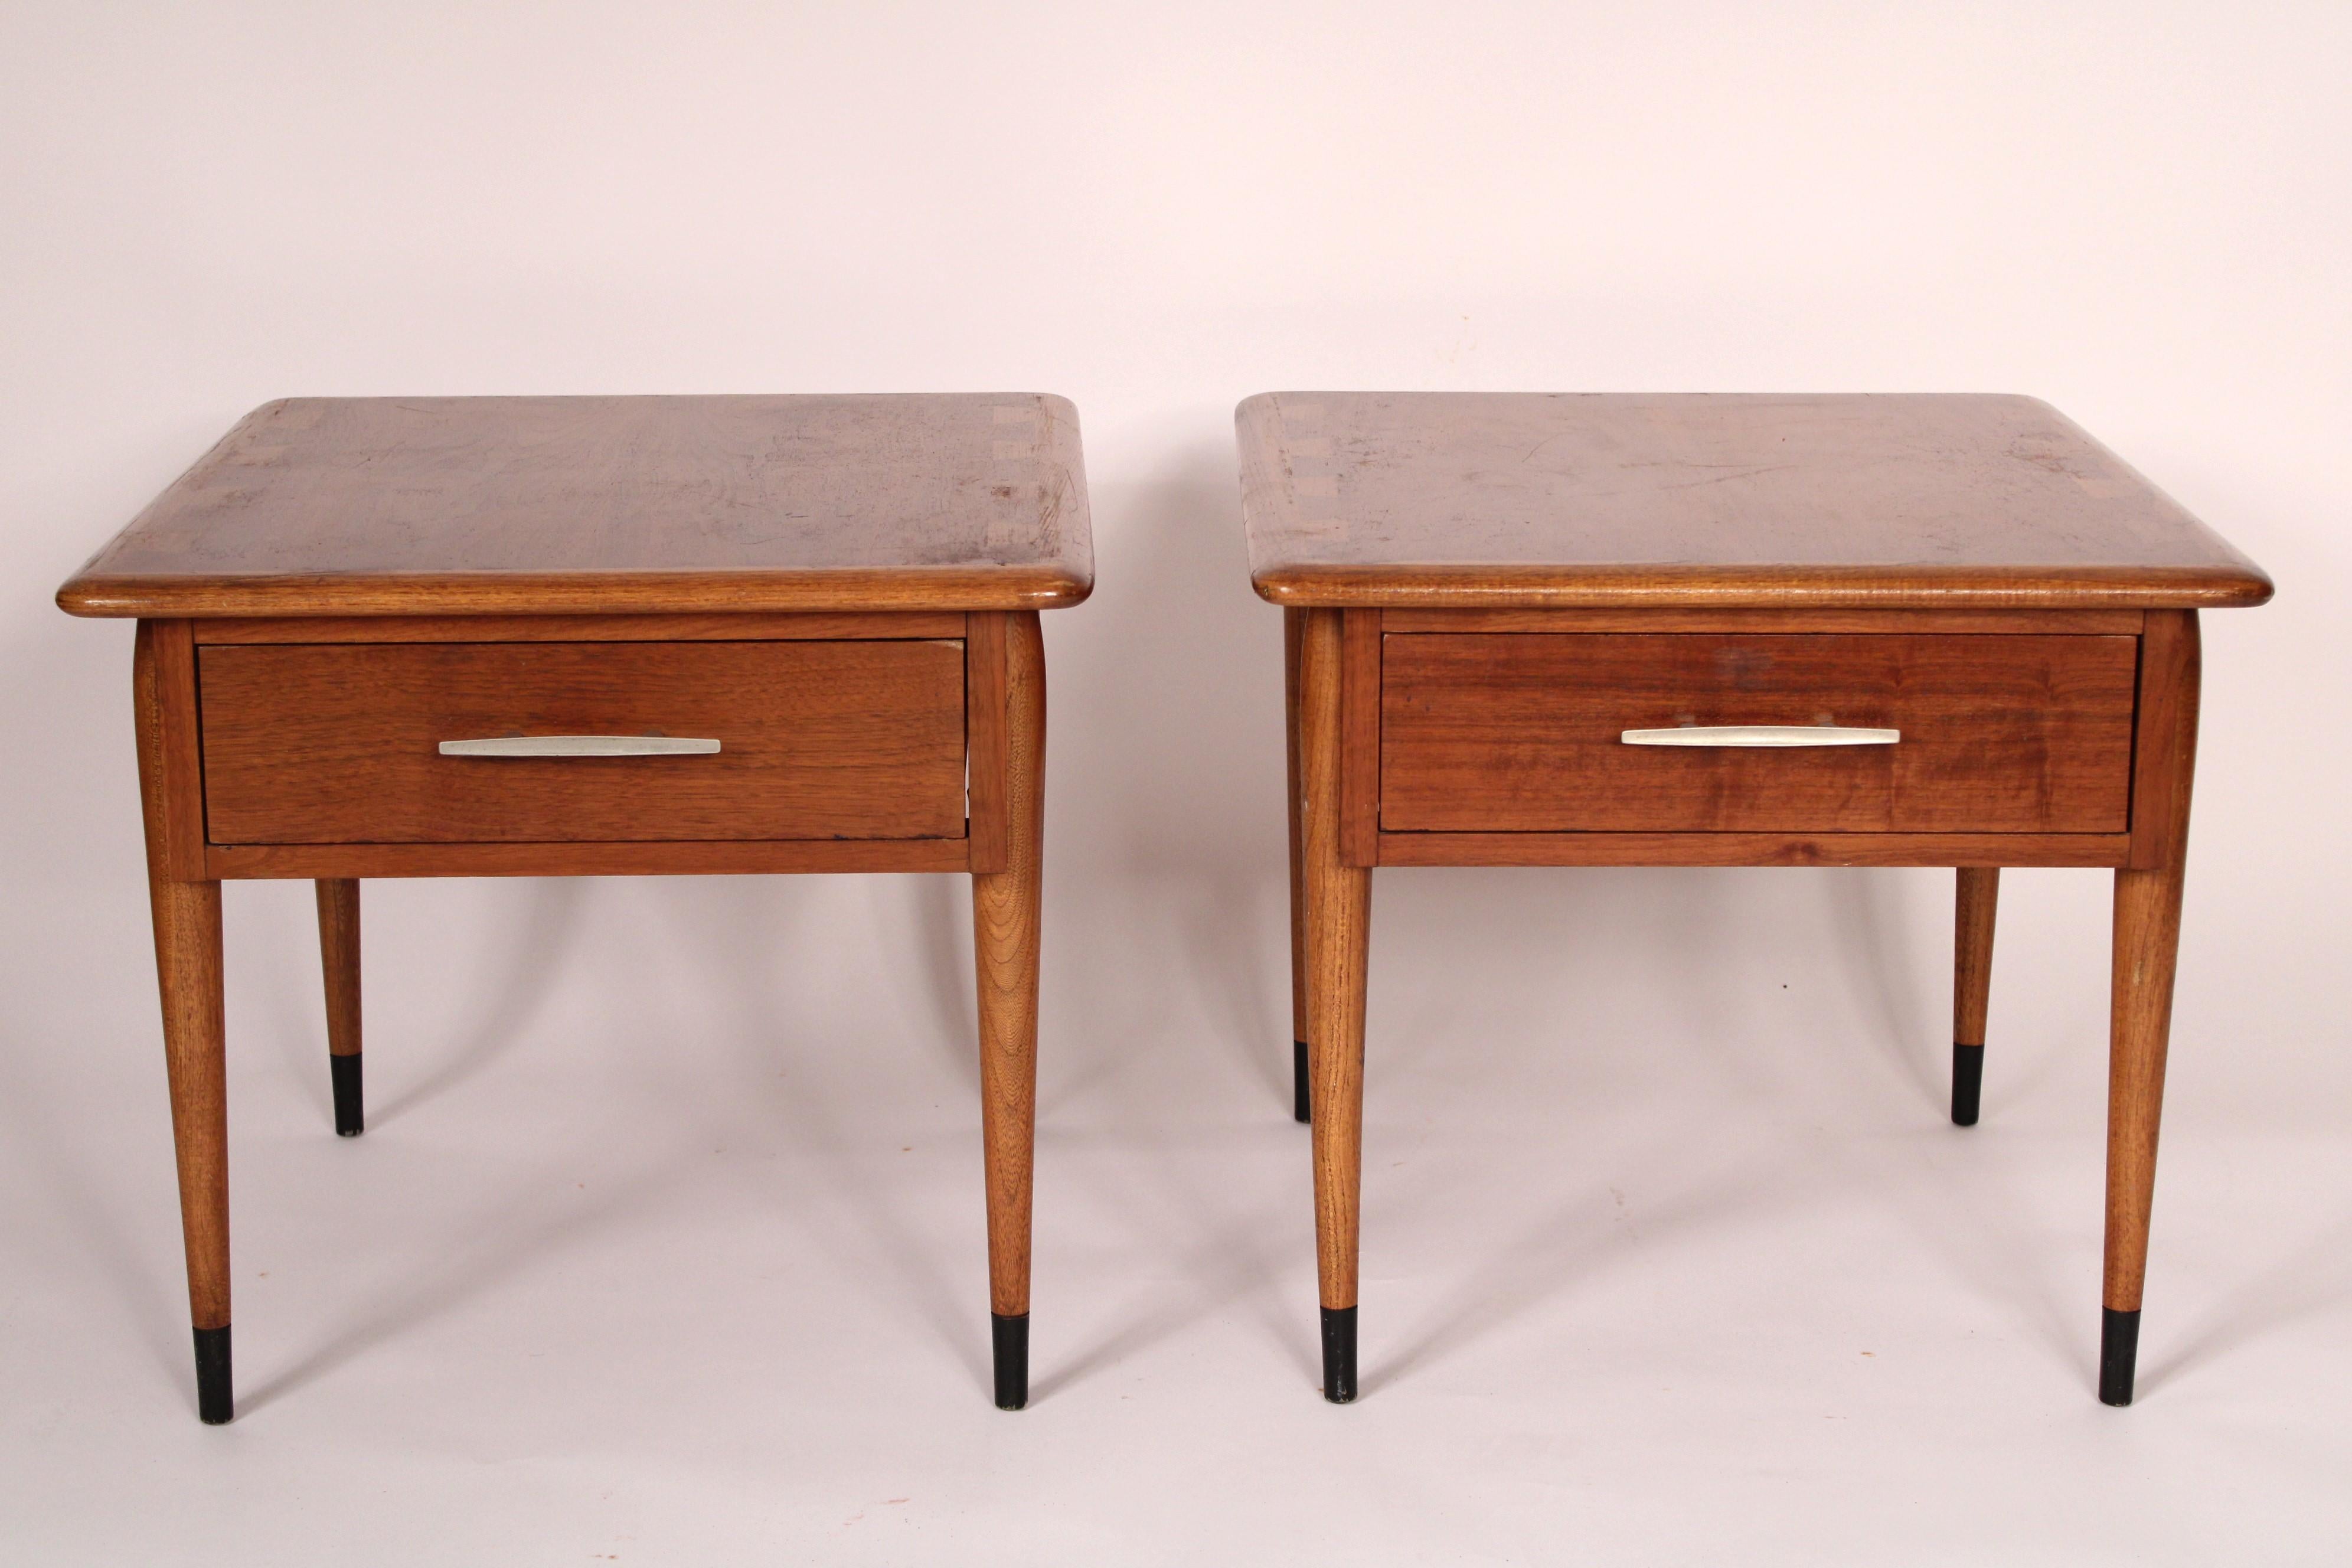 Pair of Lane midcentury modern end tables, circa 1960's. With a walnut rectangular overhanging top with rounded corner and elm dovetails, a dovetailed drawer with nickel hardware, resting on turned tapered legs.
Bottom stenciled, design patent